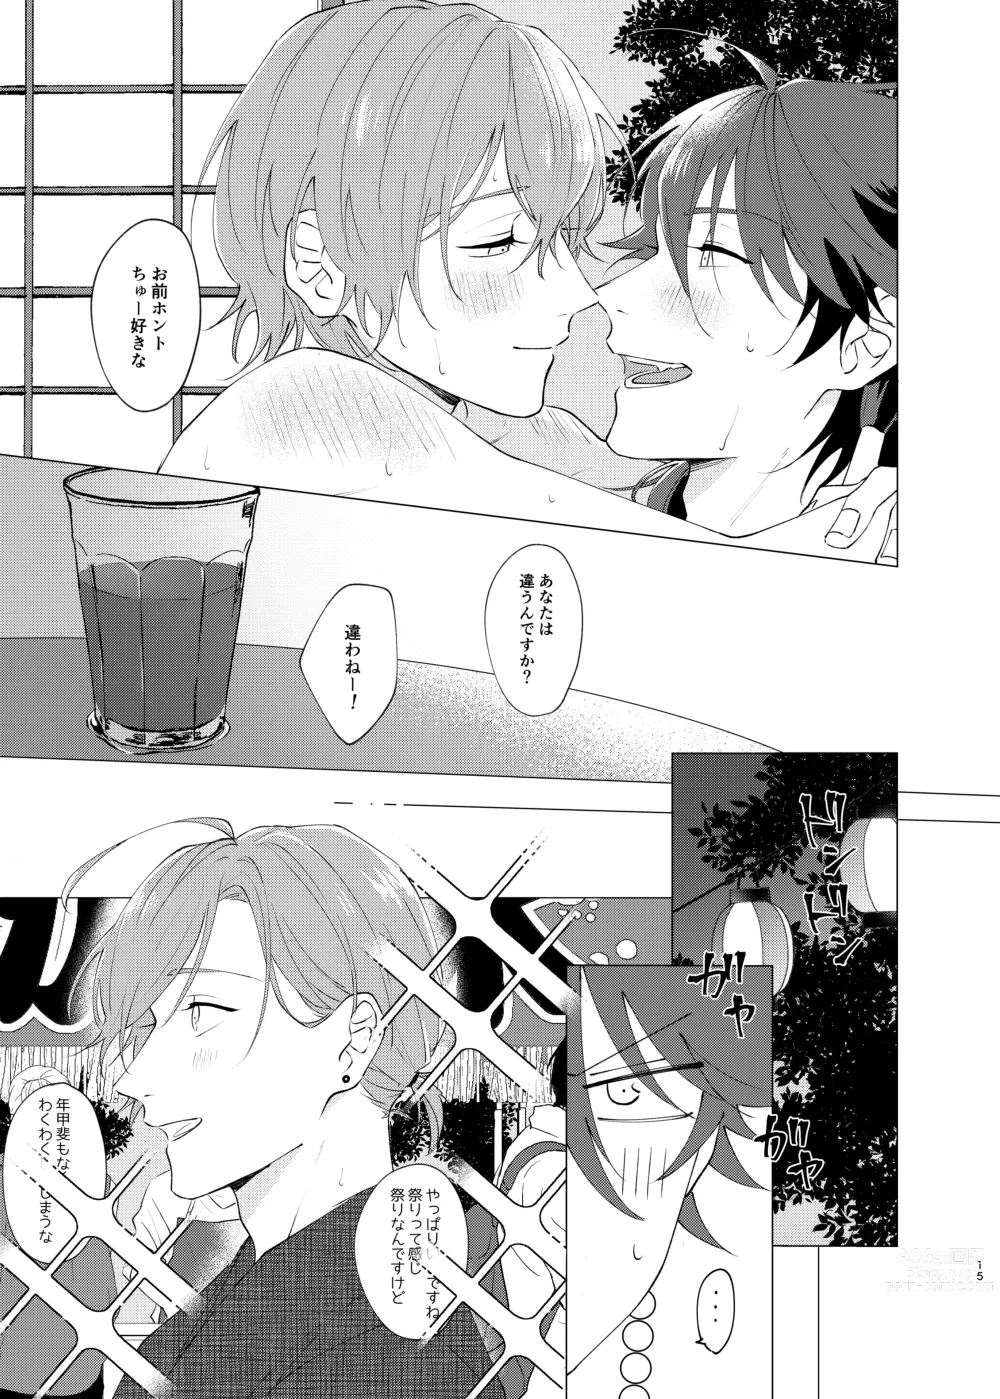 Page 13 of doujinshi Im leaving for good.